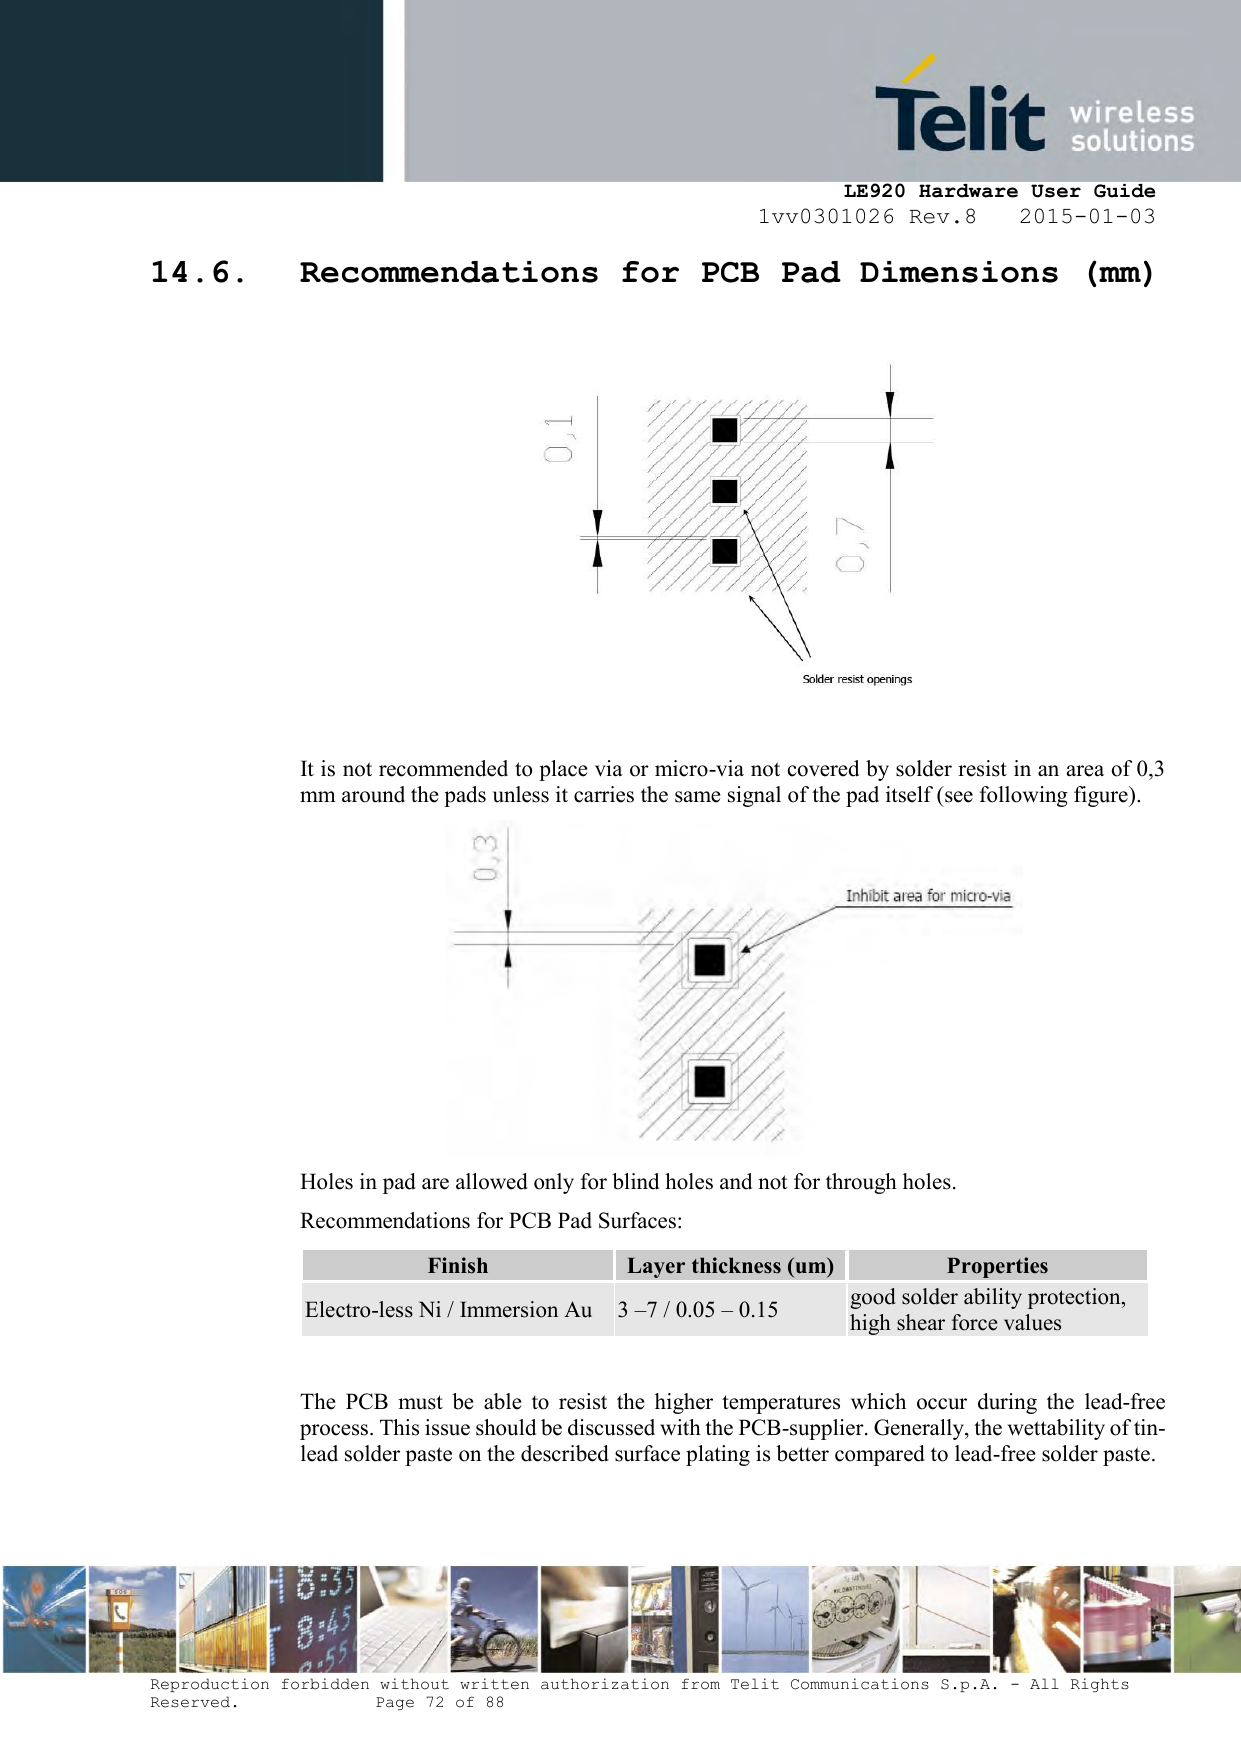     LE920 Hardware User Guide 1vv0301026 Rev.8   2015-01-03 Reproduction forbidden without written authorization from Telit Communications S.p.A. - All Rights Reserved.    Page 72 of 88  14.6. Recommendations for PCB Pad Dimensions (mm)    It is not recommended to place via or micro-via not covered by solder resist in an area of 0,3 mm around the pads unless it carries the same signal of the pad itself (see following figure).  Holes in pad are allowed only for blind holes and not for through holes. Recommendations for PCB Pad Surfaces: Finish Layer thickness (um) Properties Electro-less Ni / Immersion Au 3 –7 / 0.05 – 0.15 good solder ability protection, high shear force values  The  PCB  must  be  able  to  resist  the  higher  temperatures  which  occur  during  the  lead-free process. This issue should be discussed with the PCB-supplier. Generally, the wettability of tin-lead solder paste on the described surface plating is better compared to lead-free solder paste.   